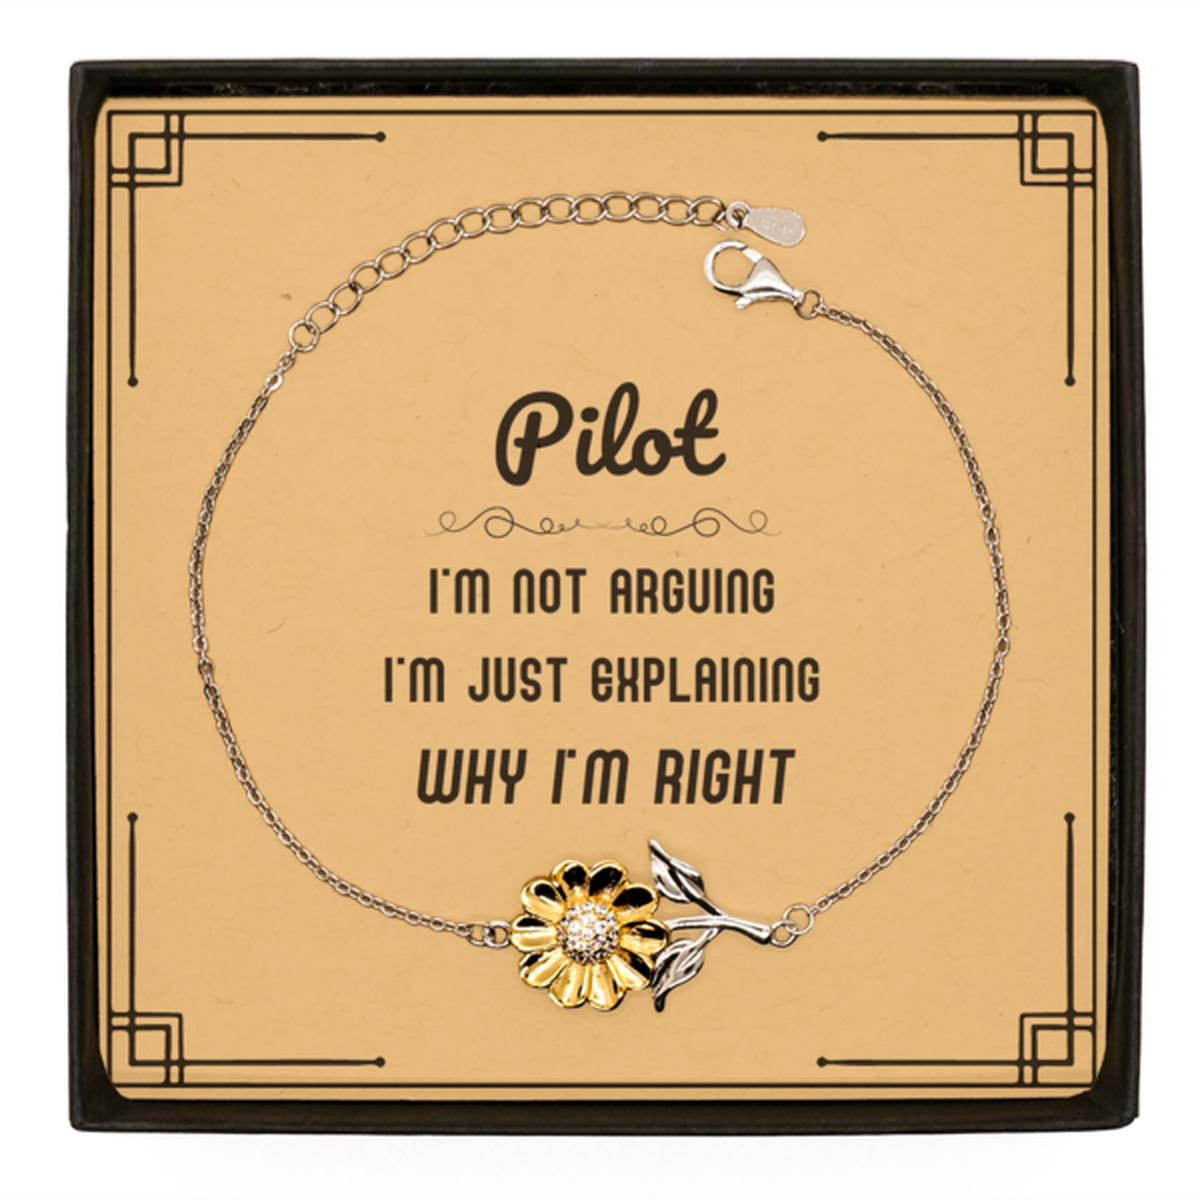 Pilot I'm not Arguing. I'm Just Explaining Why I'm RIGHT Sunflower Bracelet, Funny Saying Quote Pilot Gifts For Pilot Message Card Graduation Birthday Christmas Gifts for Men Women Coworker